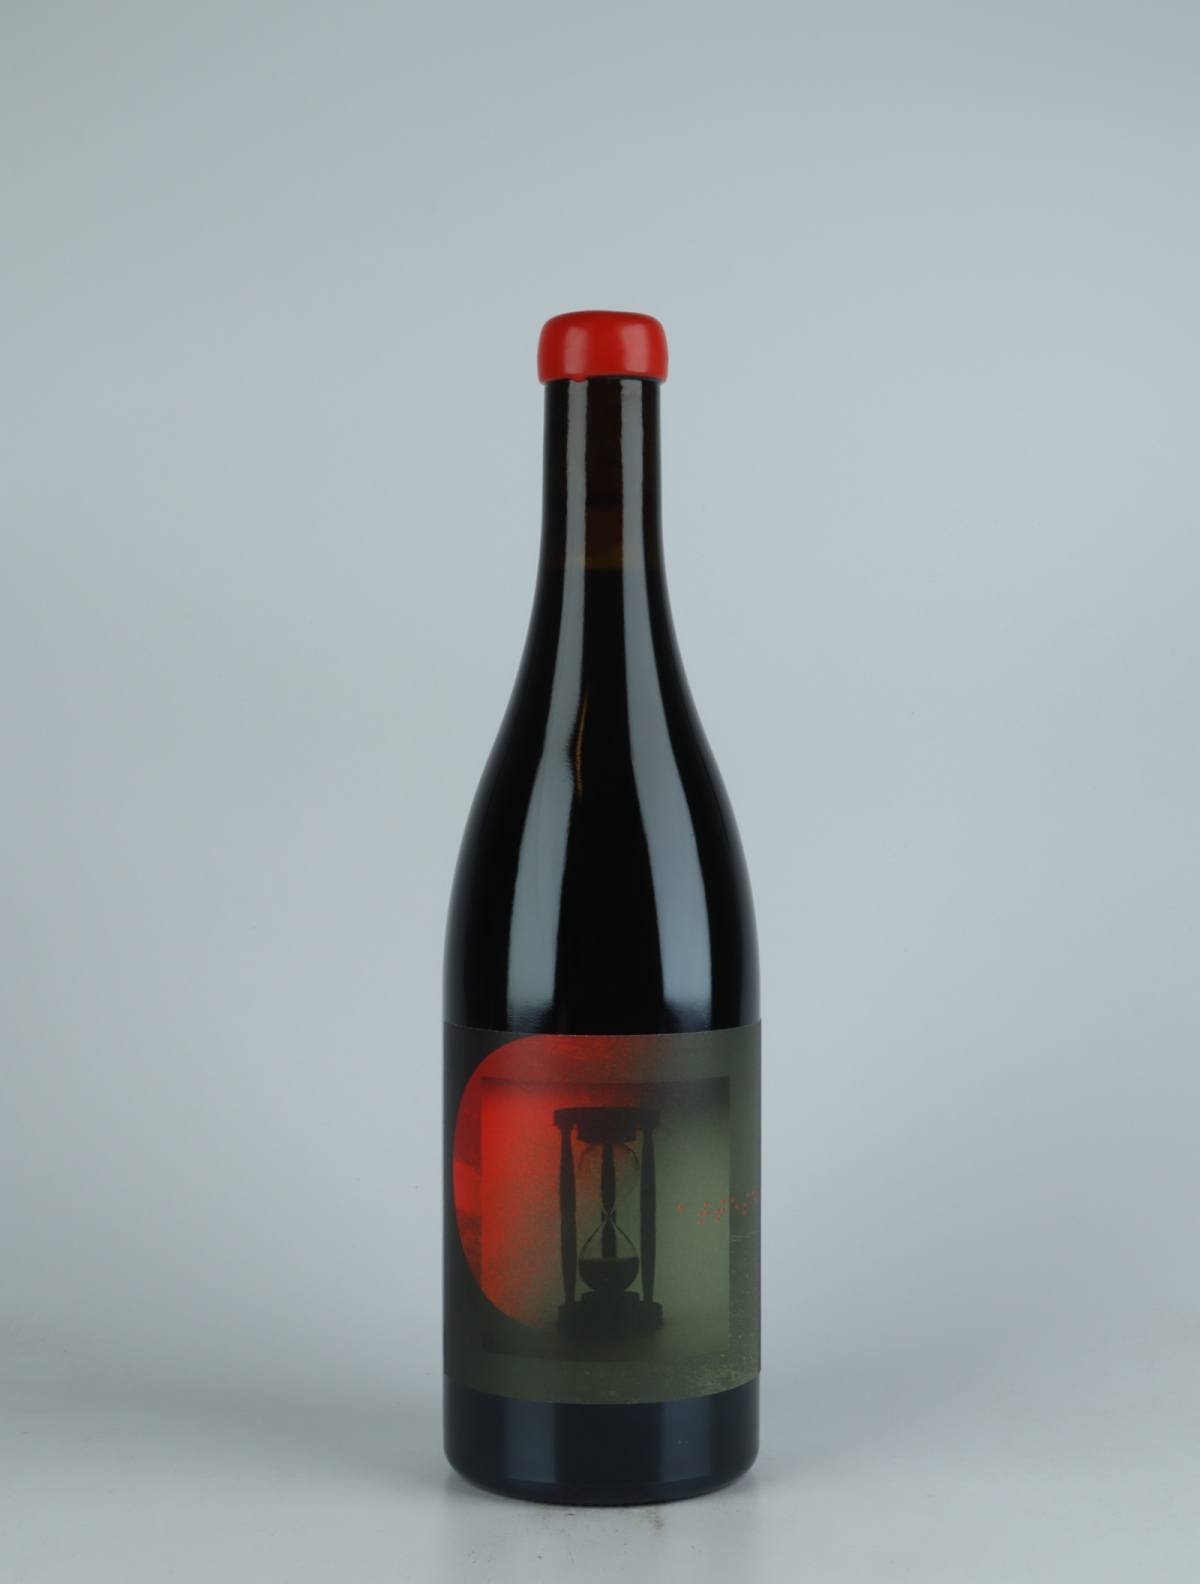 A bottle 2015 Attese Red wine from do.t.e Vini, Tuscany in Italy